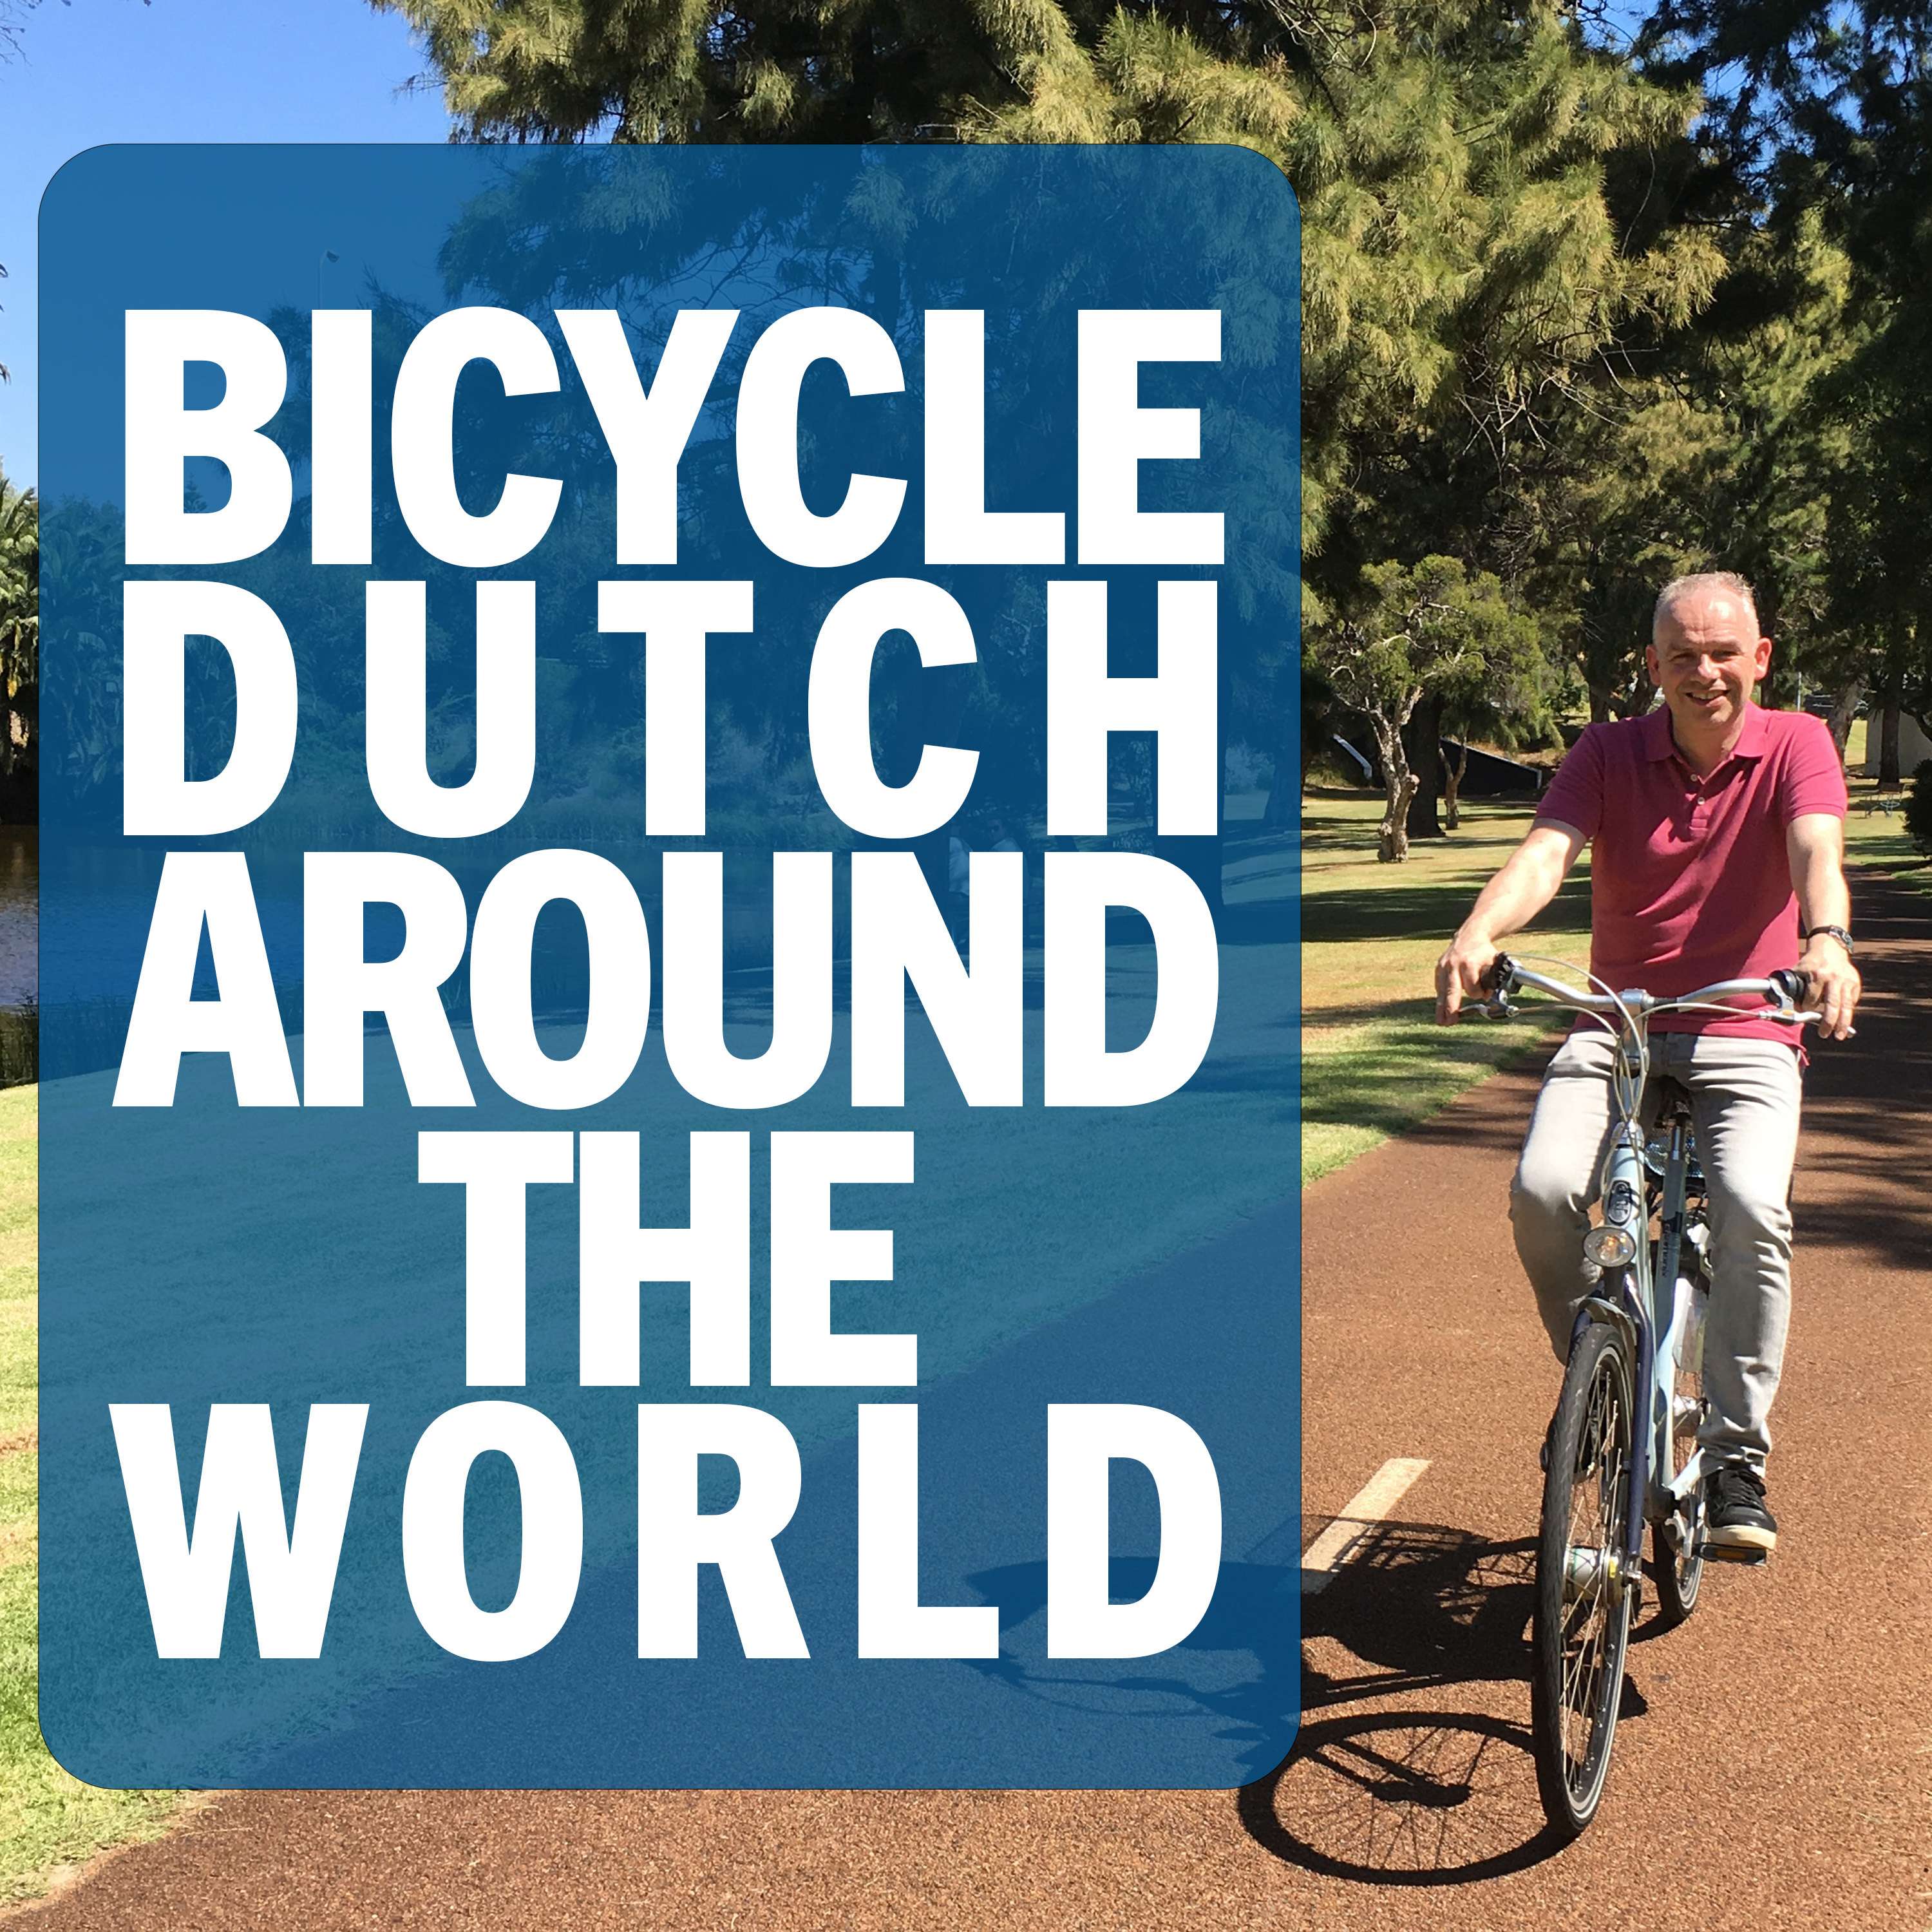 The Bicycle Dutch Journey w/ Mark Wagenbuur (video available)